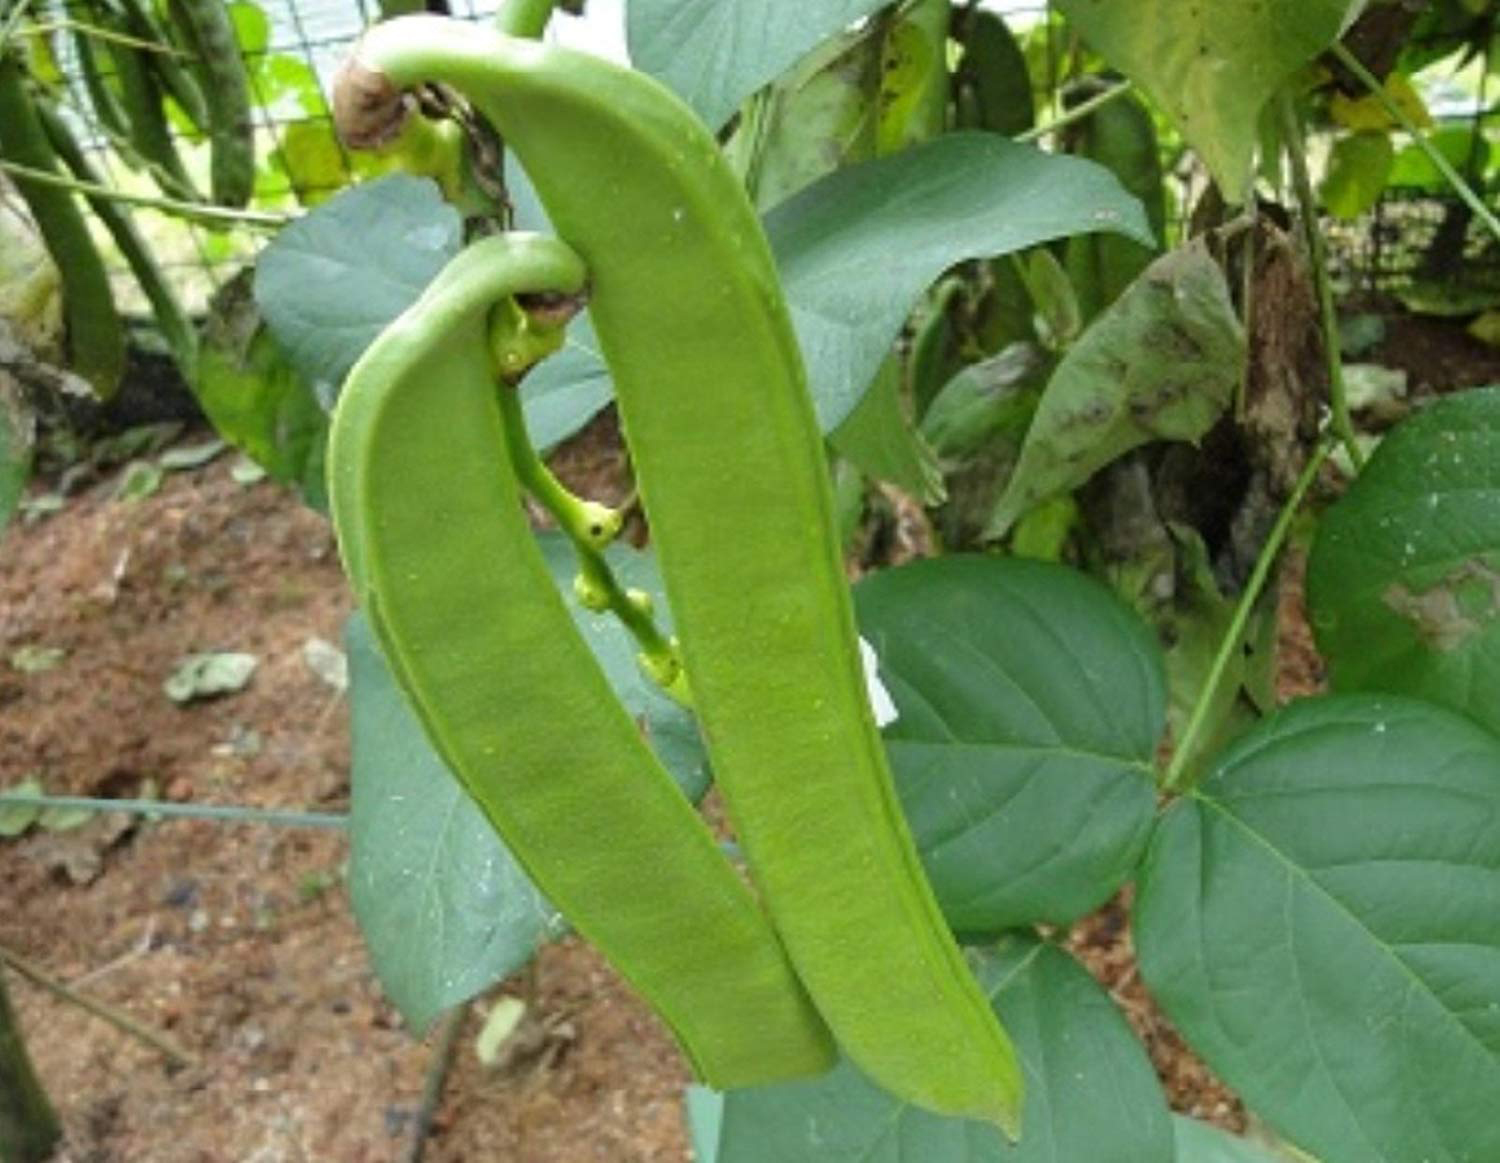 Immature-Jack-bean-pods-on-the-plant